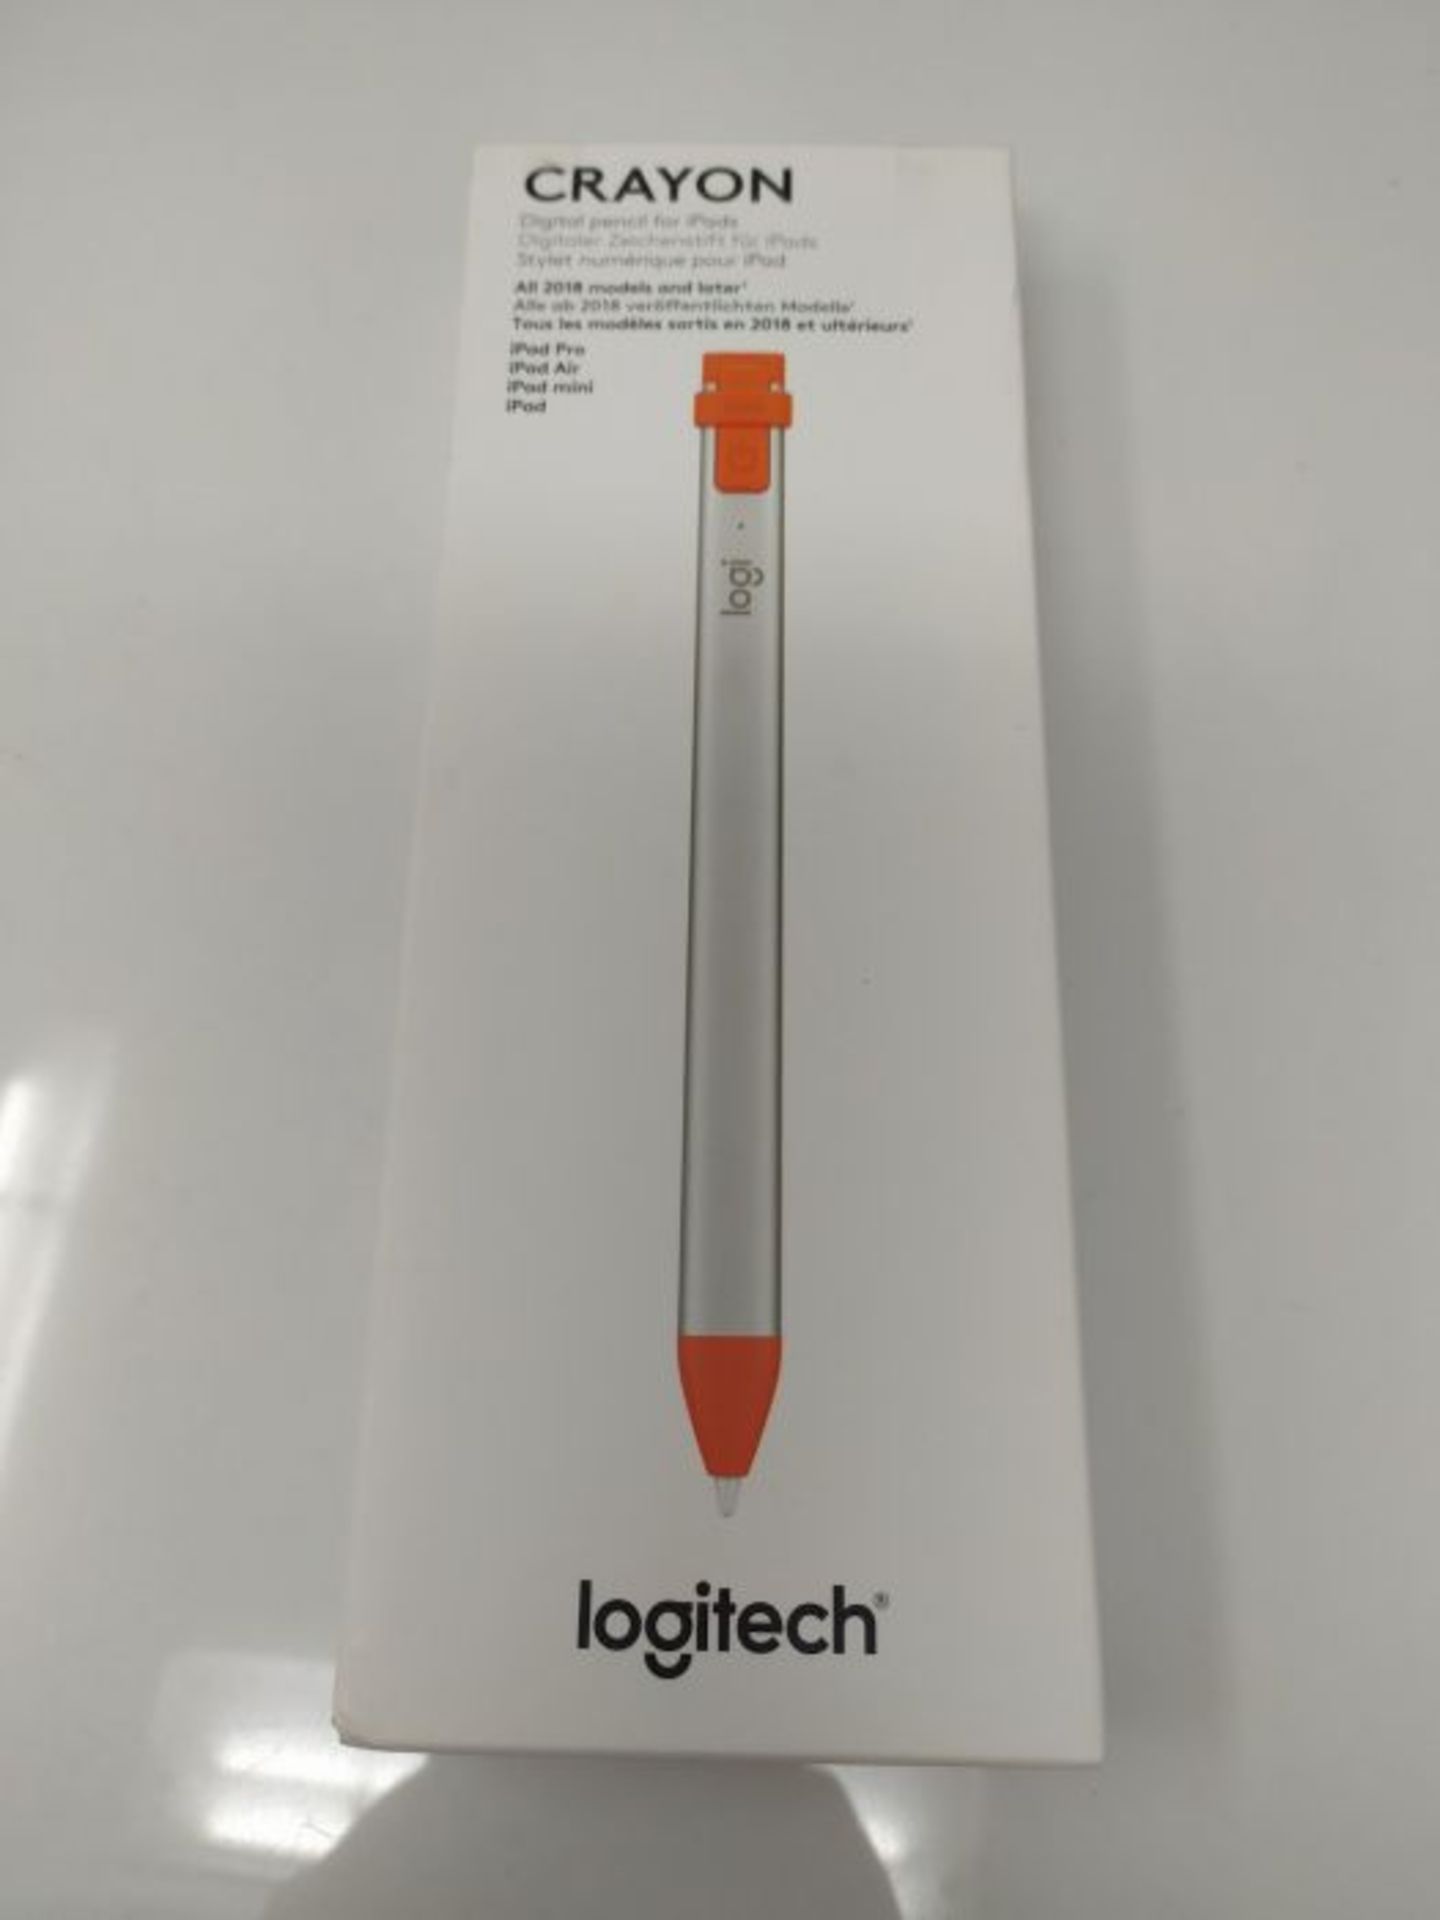 RRP £59.00 Logitech Crayon Digital Pencil For All iPads Released in 2019 or Later, iPad, iPad Pro - Image 2 of 3